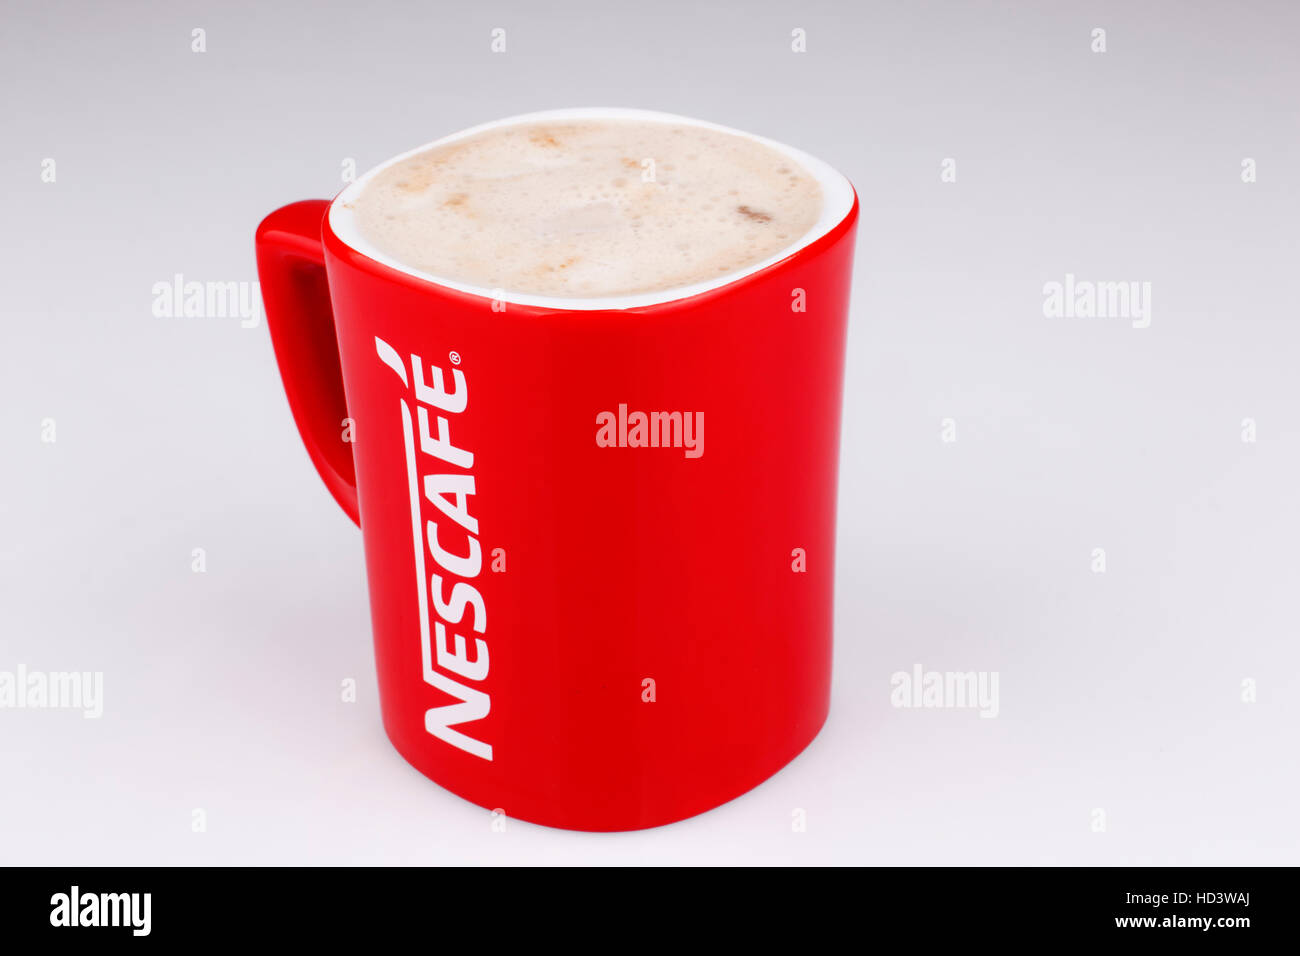 Nescafe gold cappuccino hi-res stock photography and images - Alamy